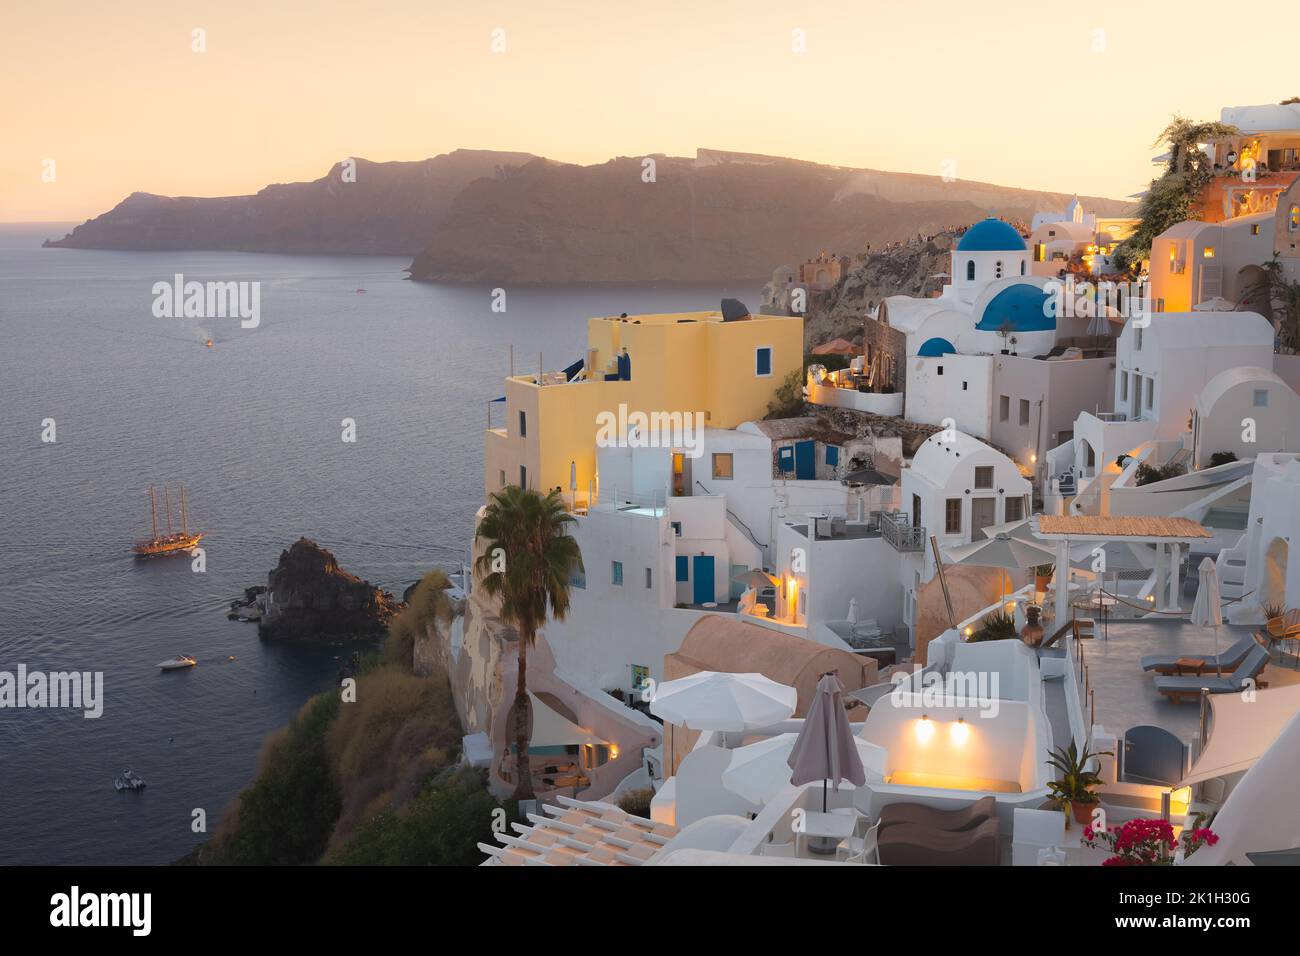 Seaside view at sunset of traditional white wash buildings and blue dome church at the popular seaside tourist resort village of Oia on the Greek isla Stock Photo